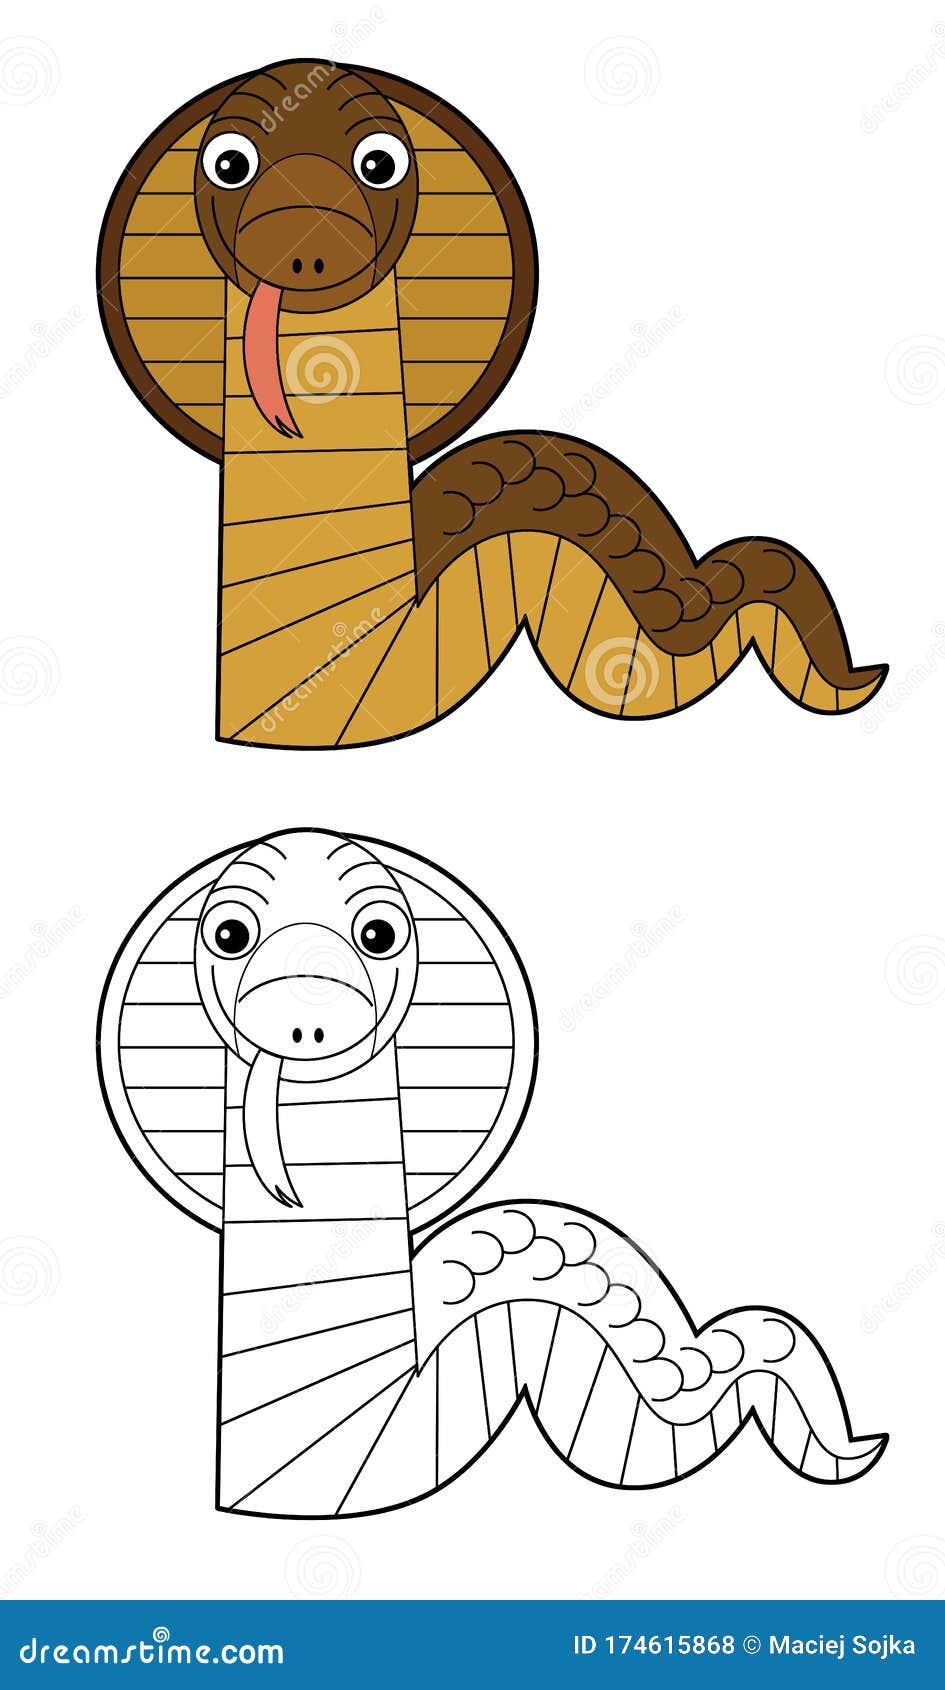 Cartoon Sketchbook Asian Scene with Snake Cobra on White Background with  Sign Name of Animal - Illustration Stock Illustration - Illustration of  drawing, colorful: 174615868